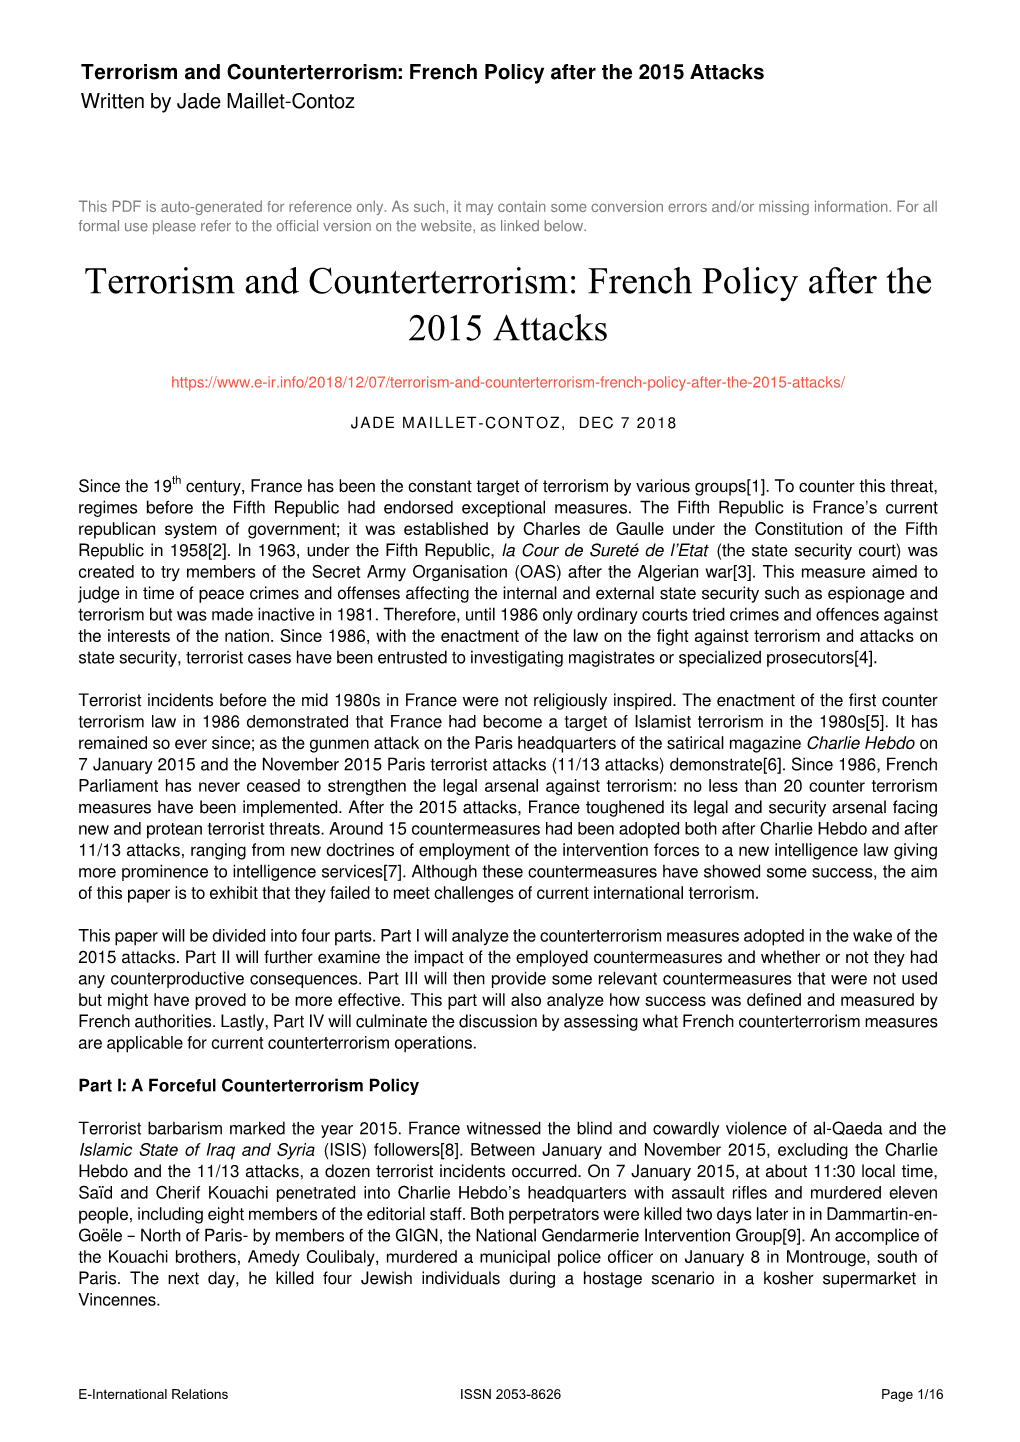 Terrorism and Counterterrorism: French Policy After the 2015 Attacks Written by Jade Maillet-Contoz